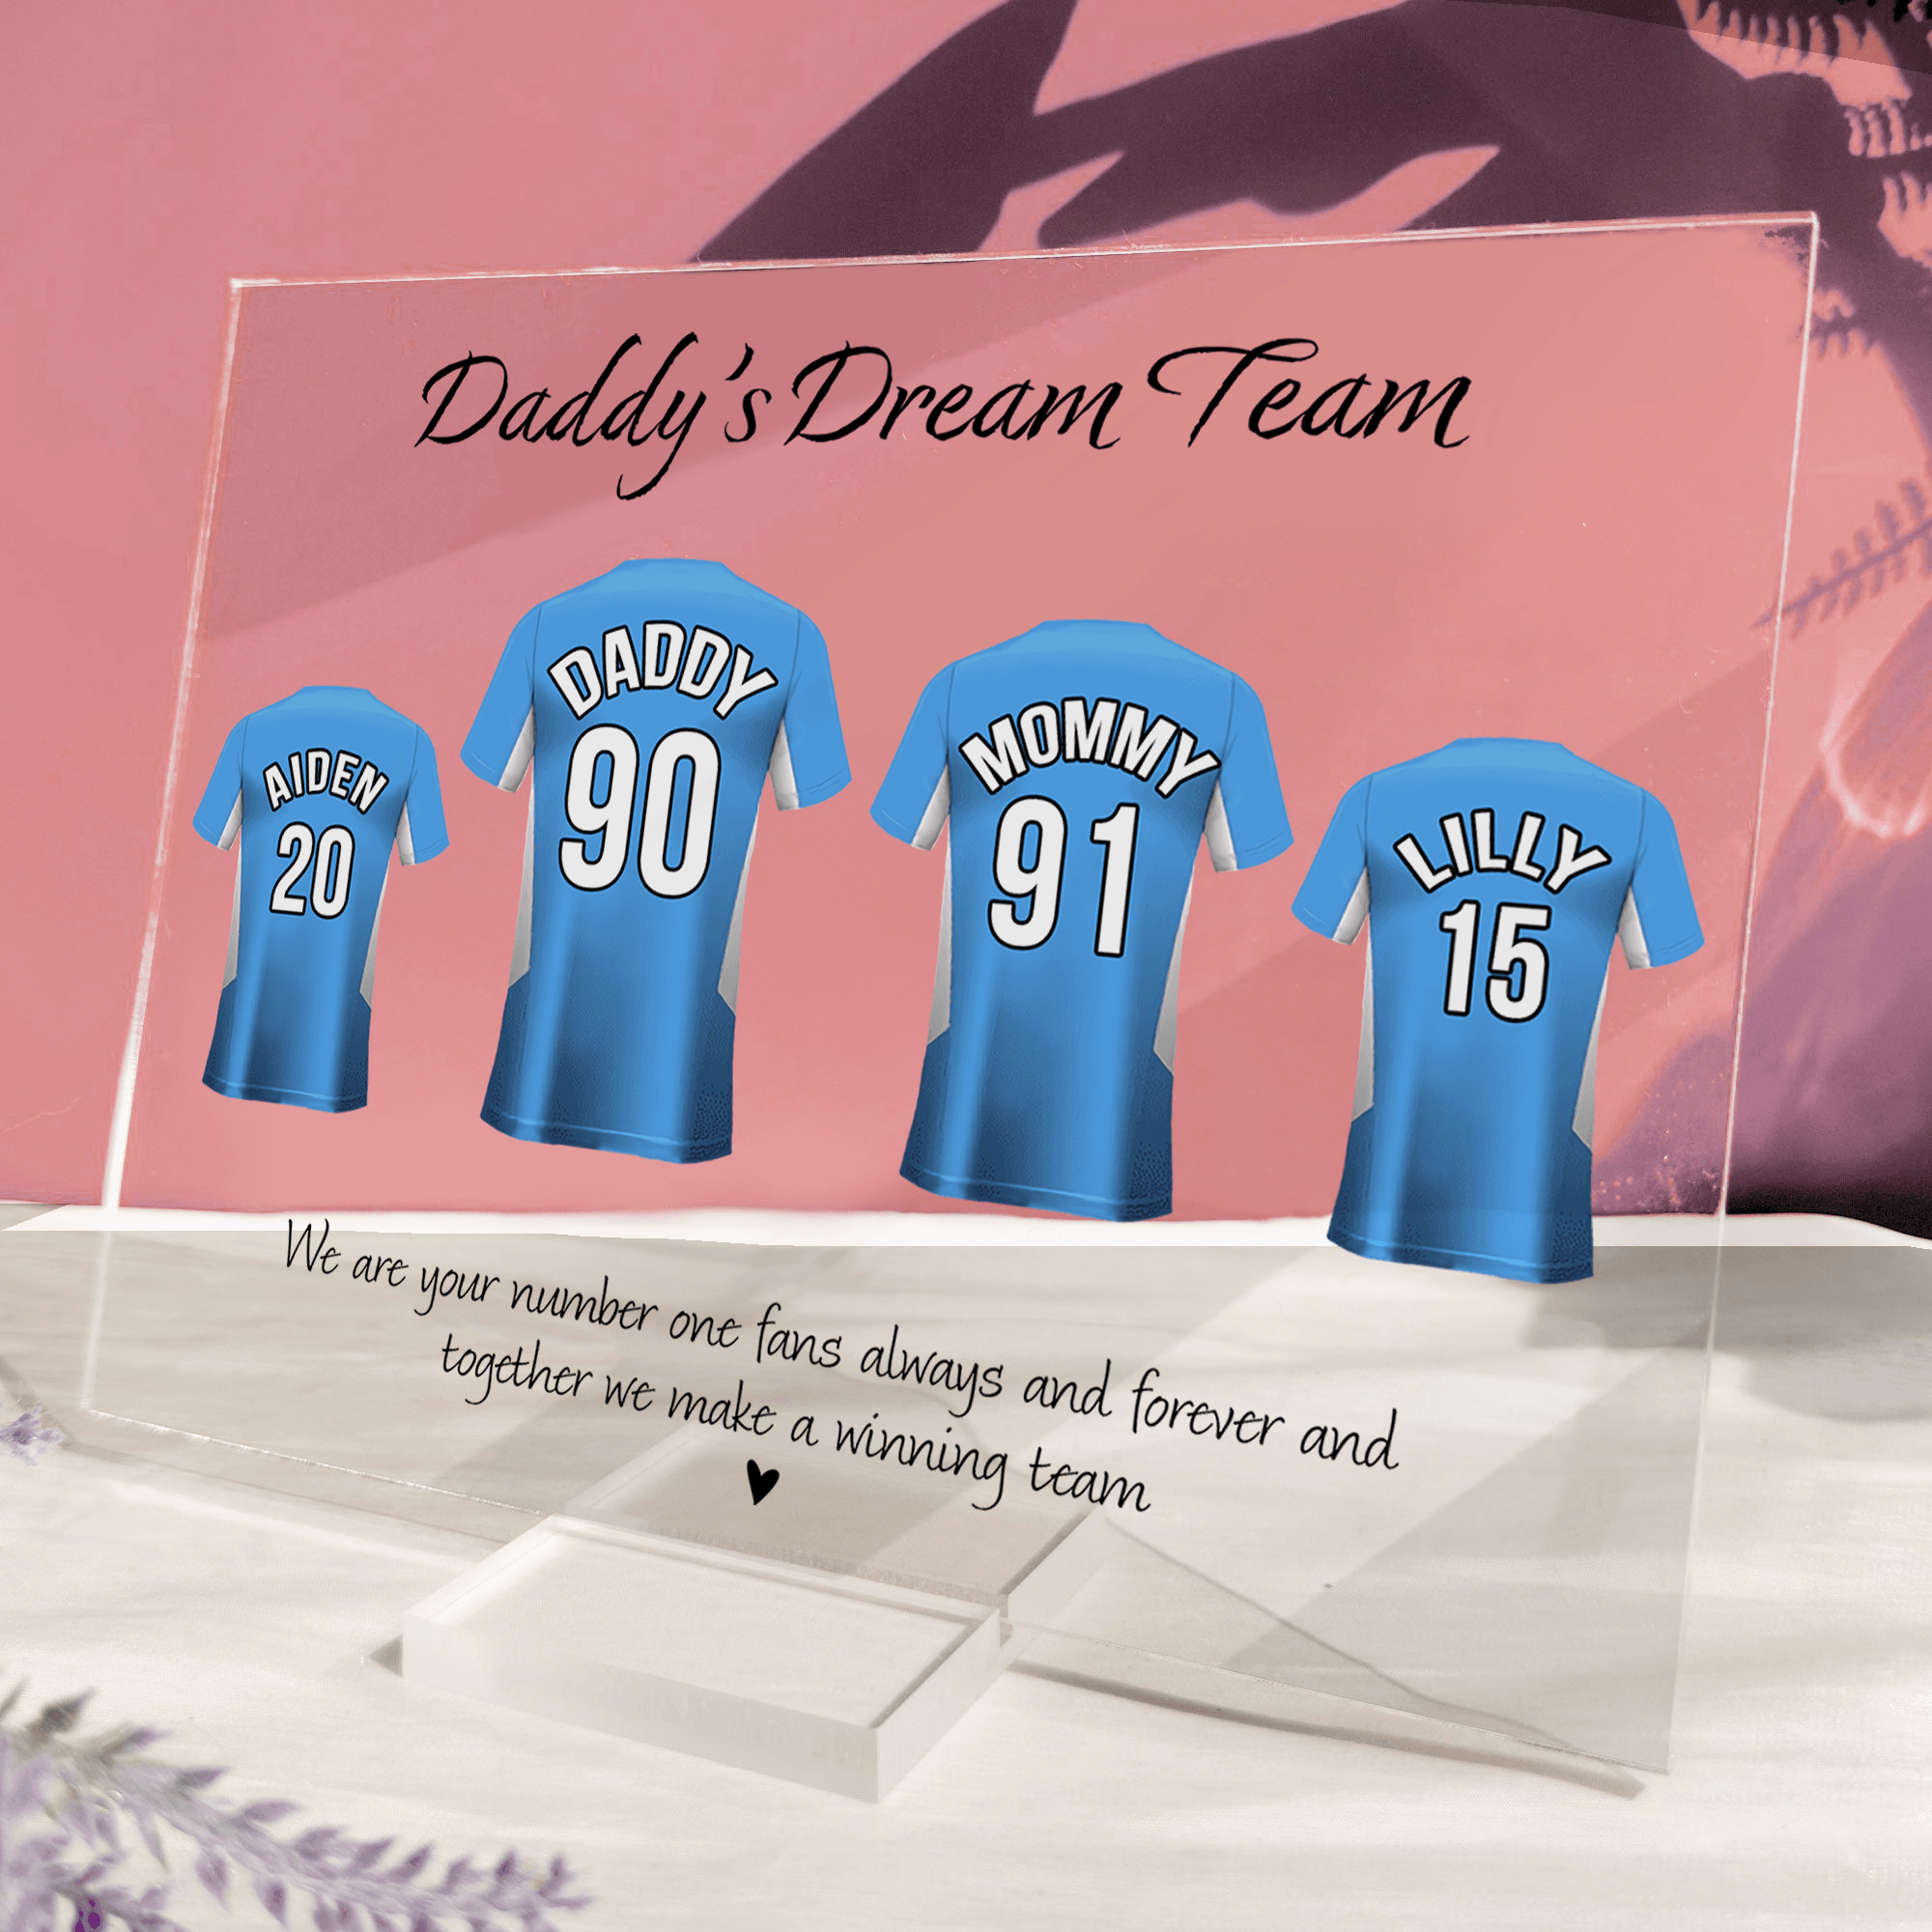 Daddy's Dream Team Football Team - Fathers Day - Personalized Custom Horizontal Acrylic Plaque - Birthday, Loving, Funny Gift for Family, Grandfather/Dad/Father, Husband, Grandparent - Suzitee Store